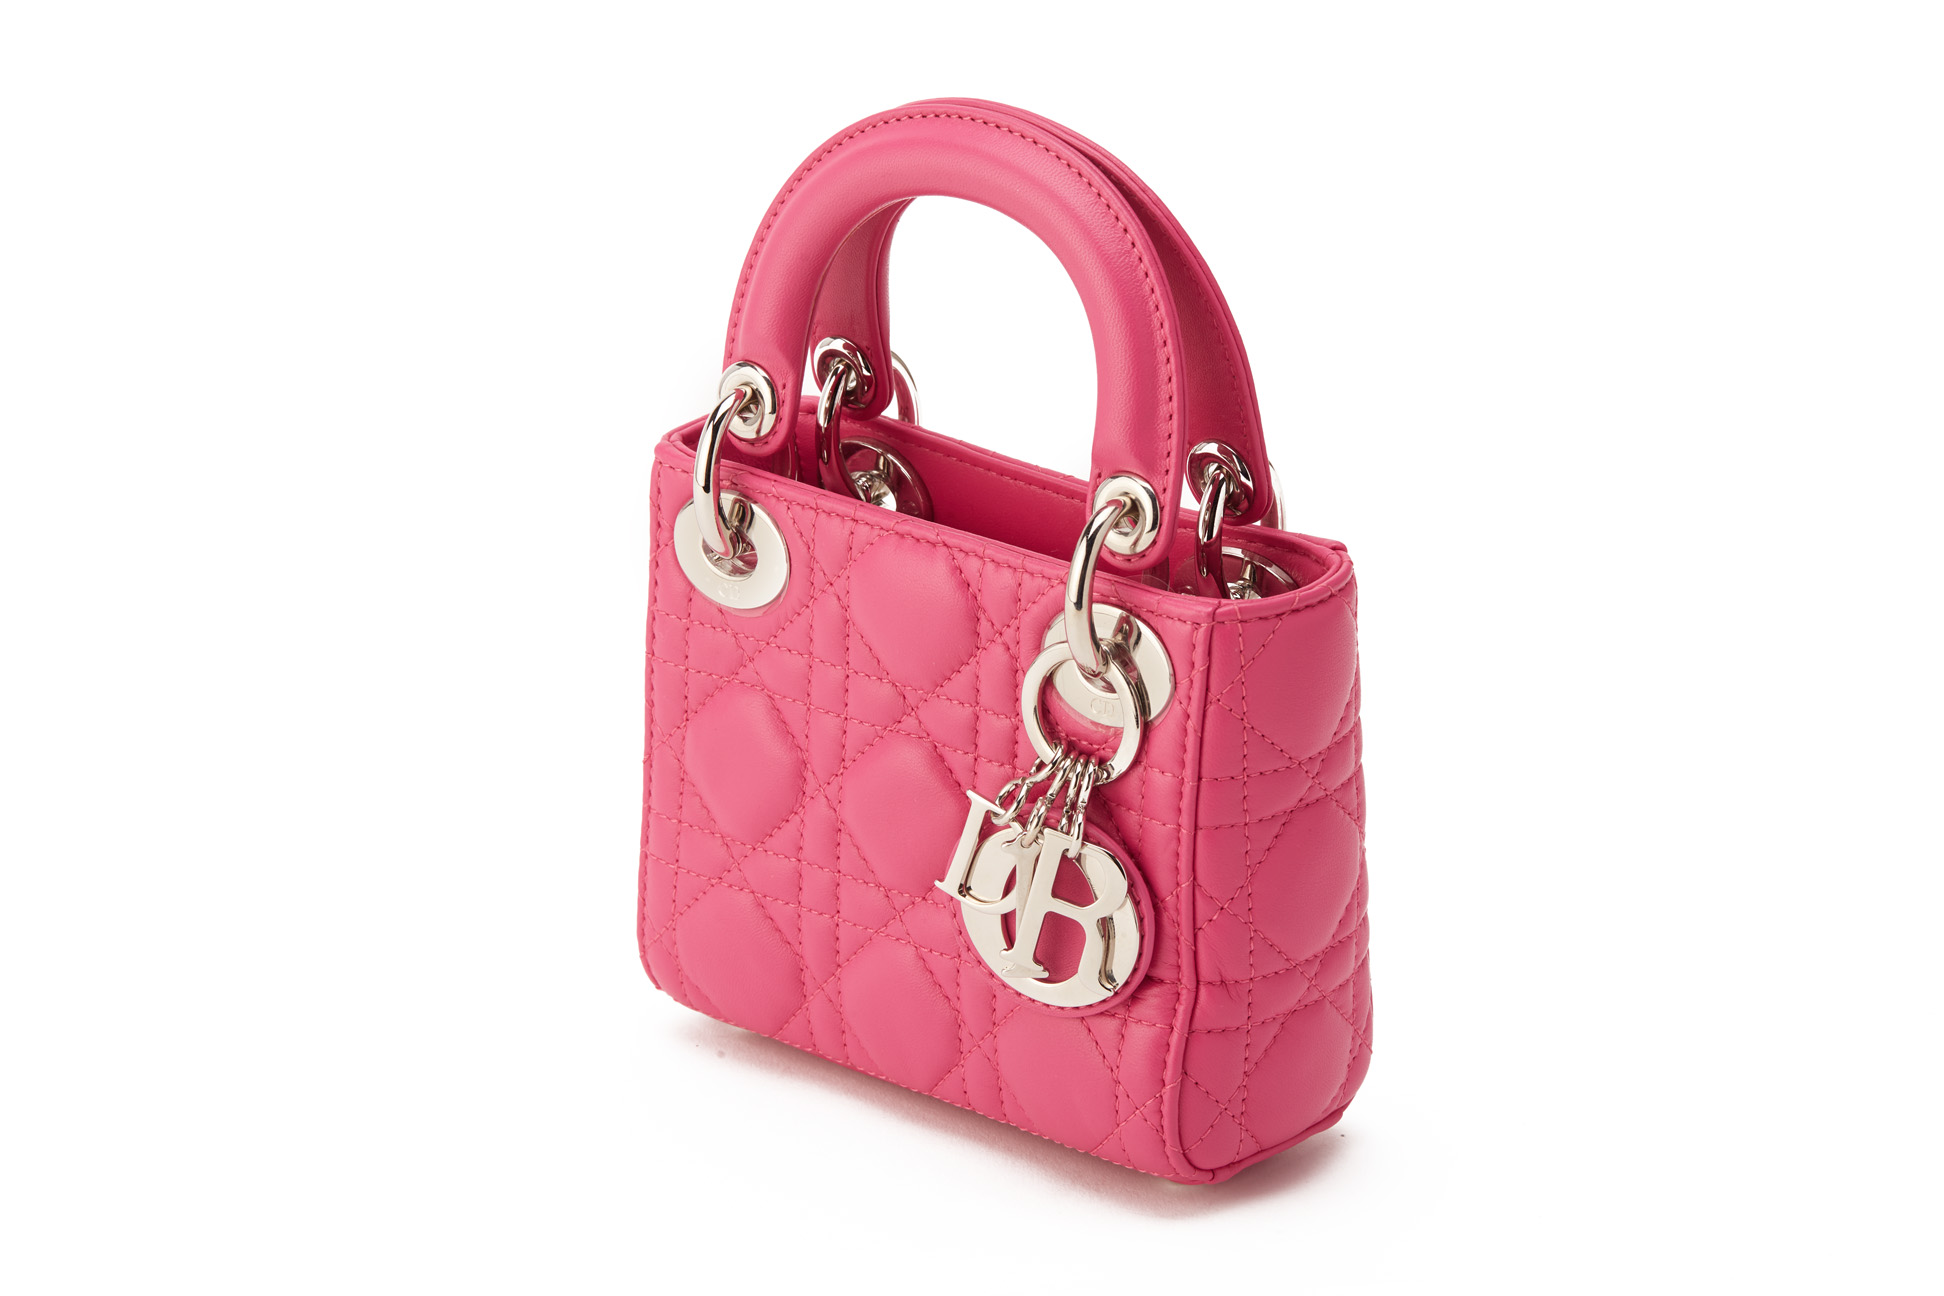 A CHRISTIAN DIOR PINK QUILTED MICRO LADY DIOR